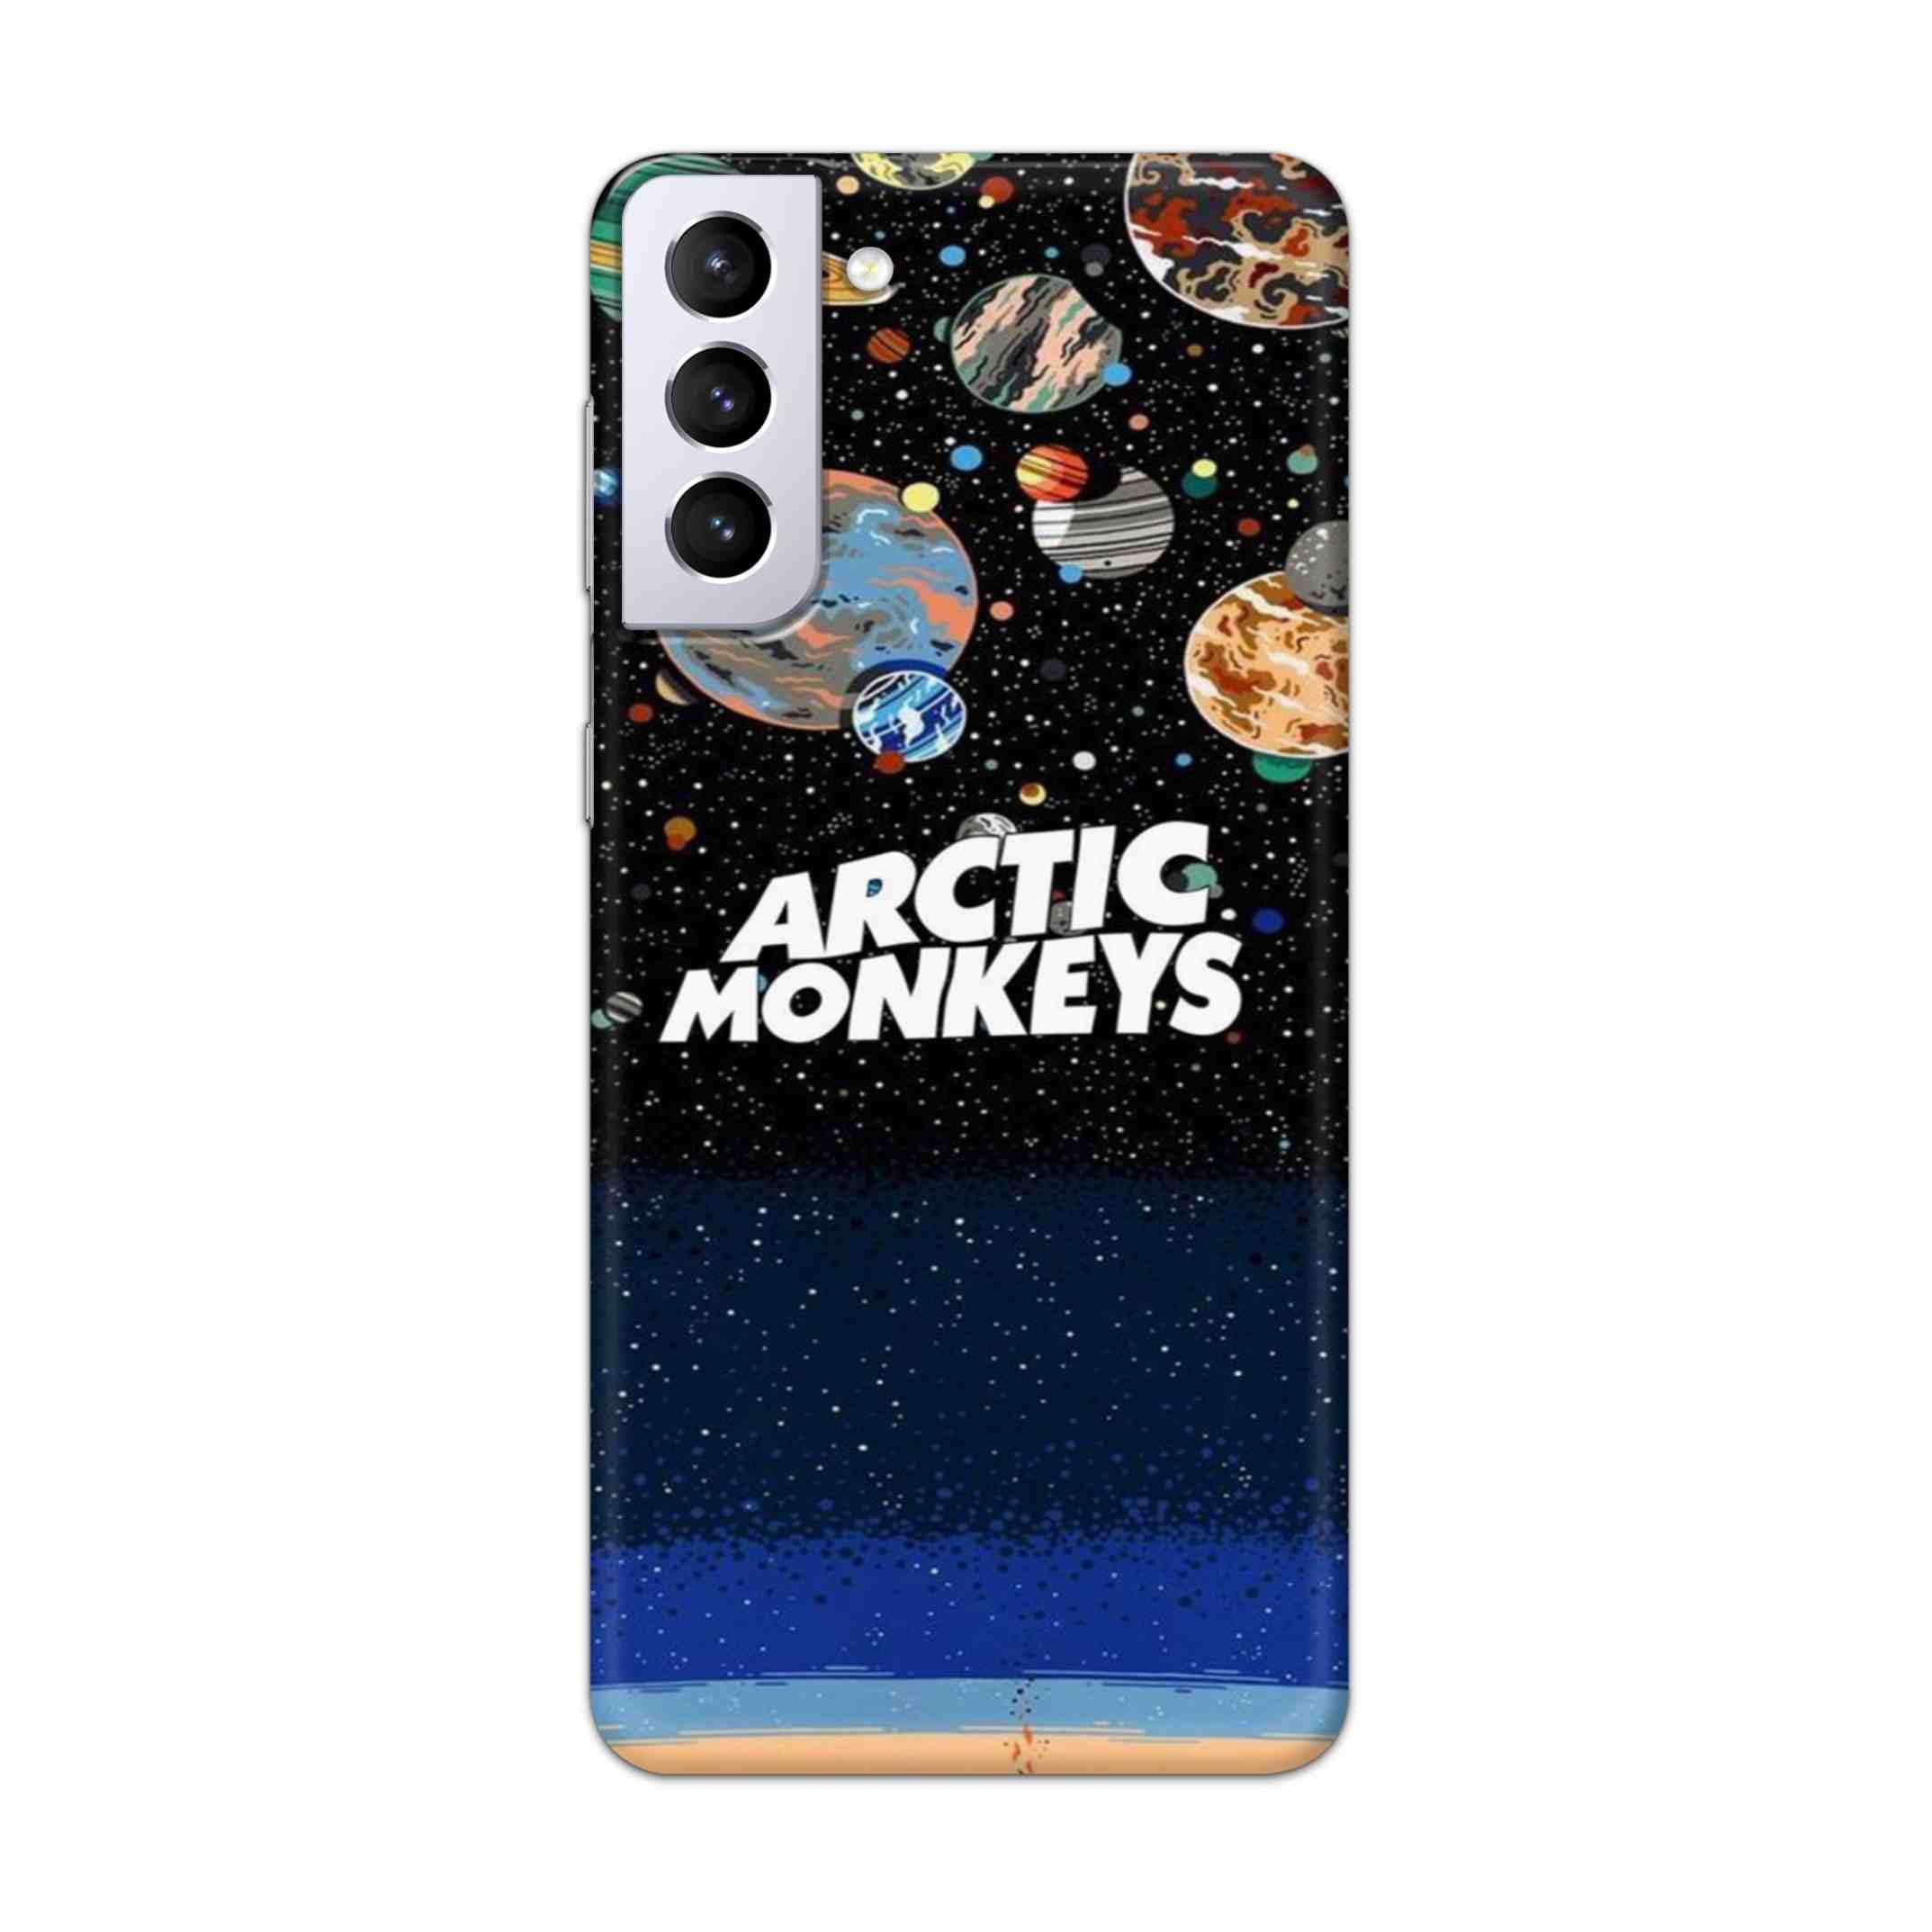 Buy Artic Monkeys Hard Back Mobile Phone Case Cover For Samsung Galaxy S21 Plus Online